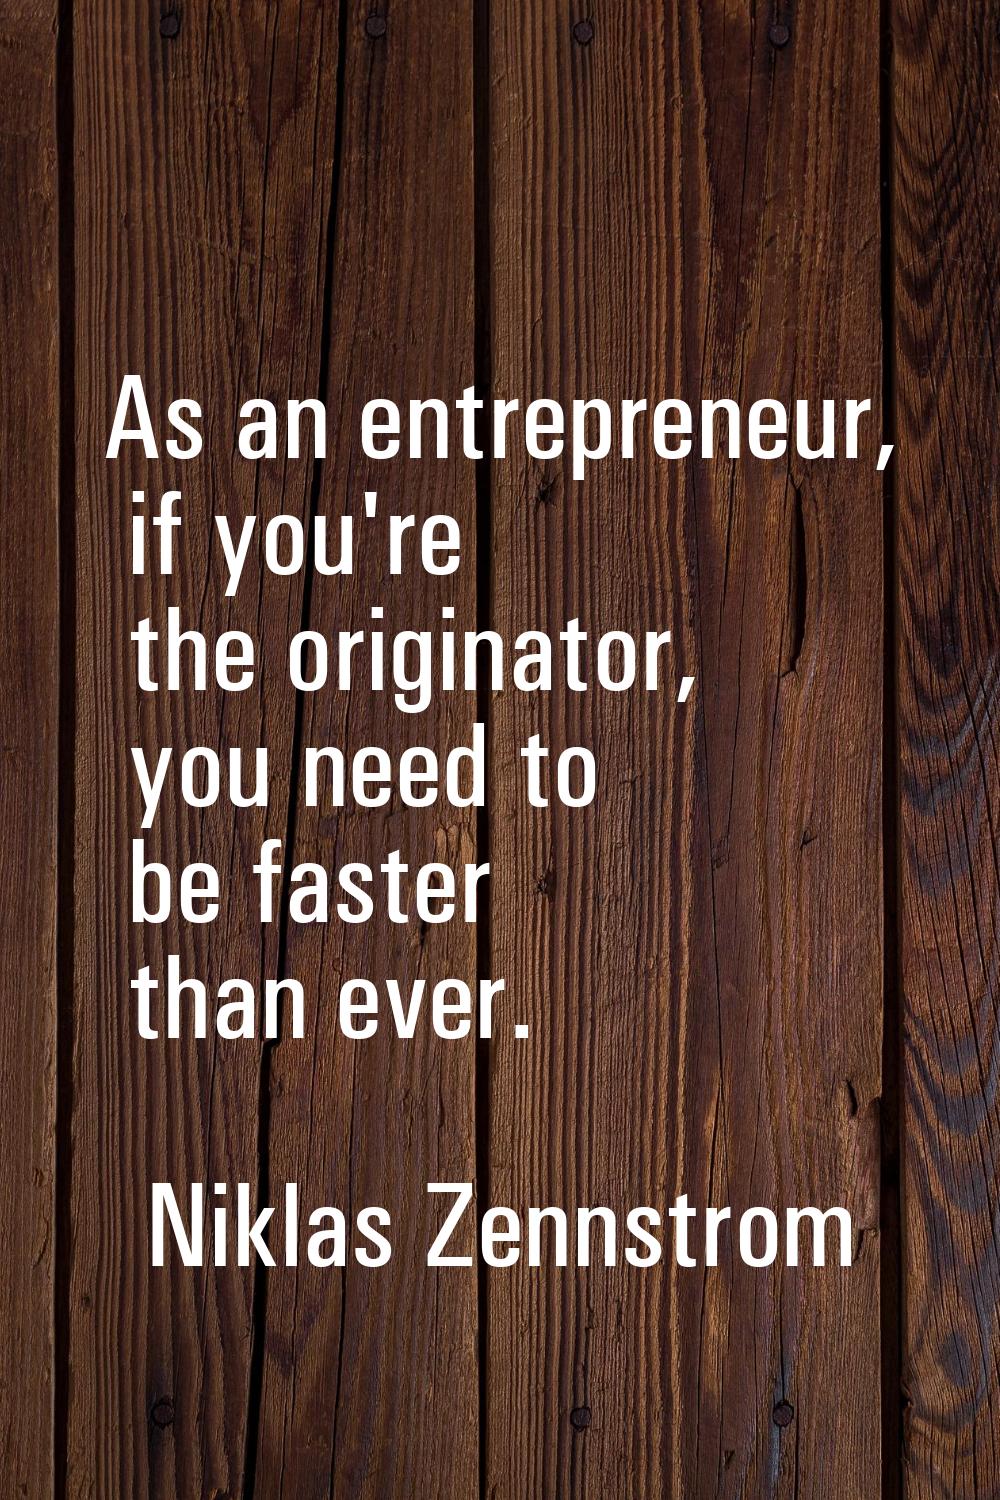 As an entrepreneur, if you're the originator, you need to be faster than ever.